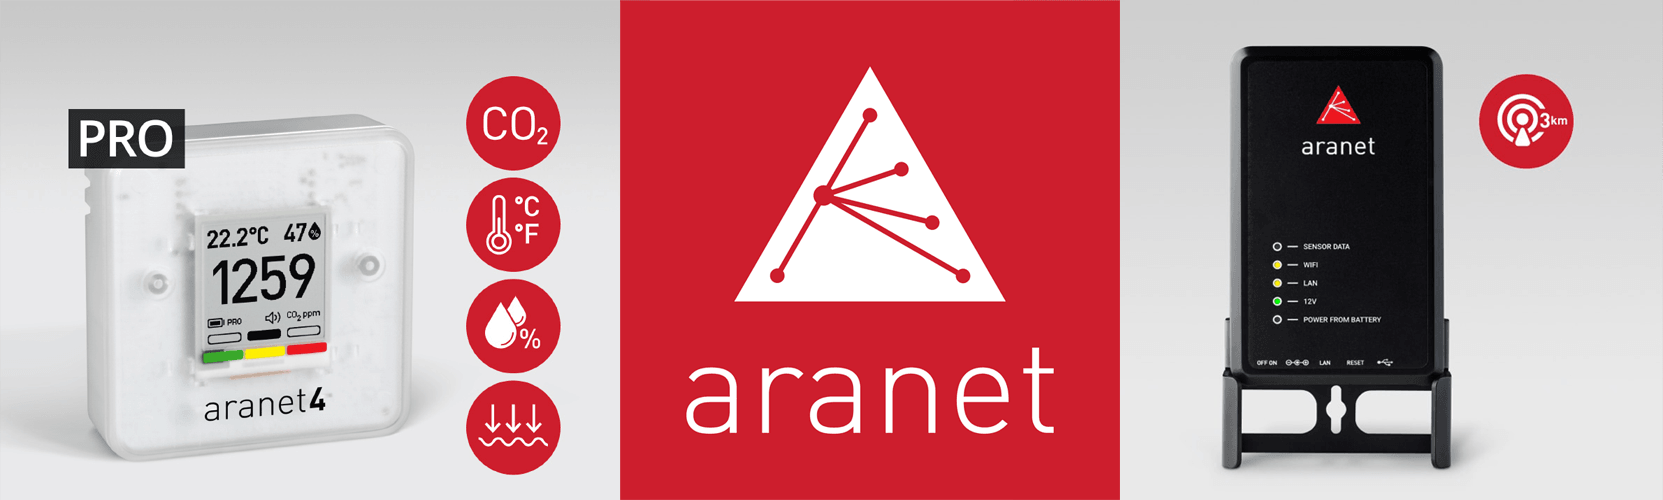 Aranet4 PRO for CO2 Realtime Monitoring of Buildings - The Temperature Shop